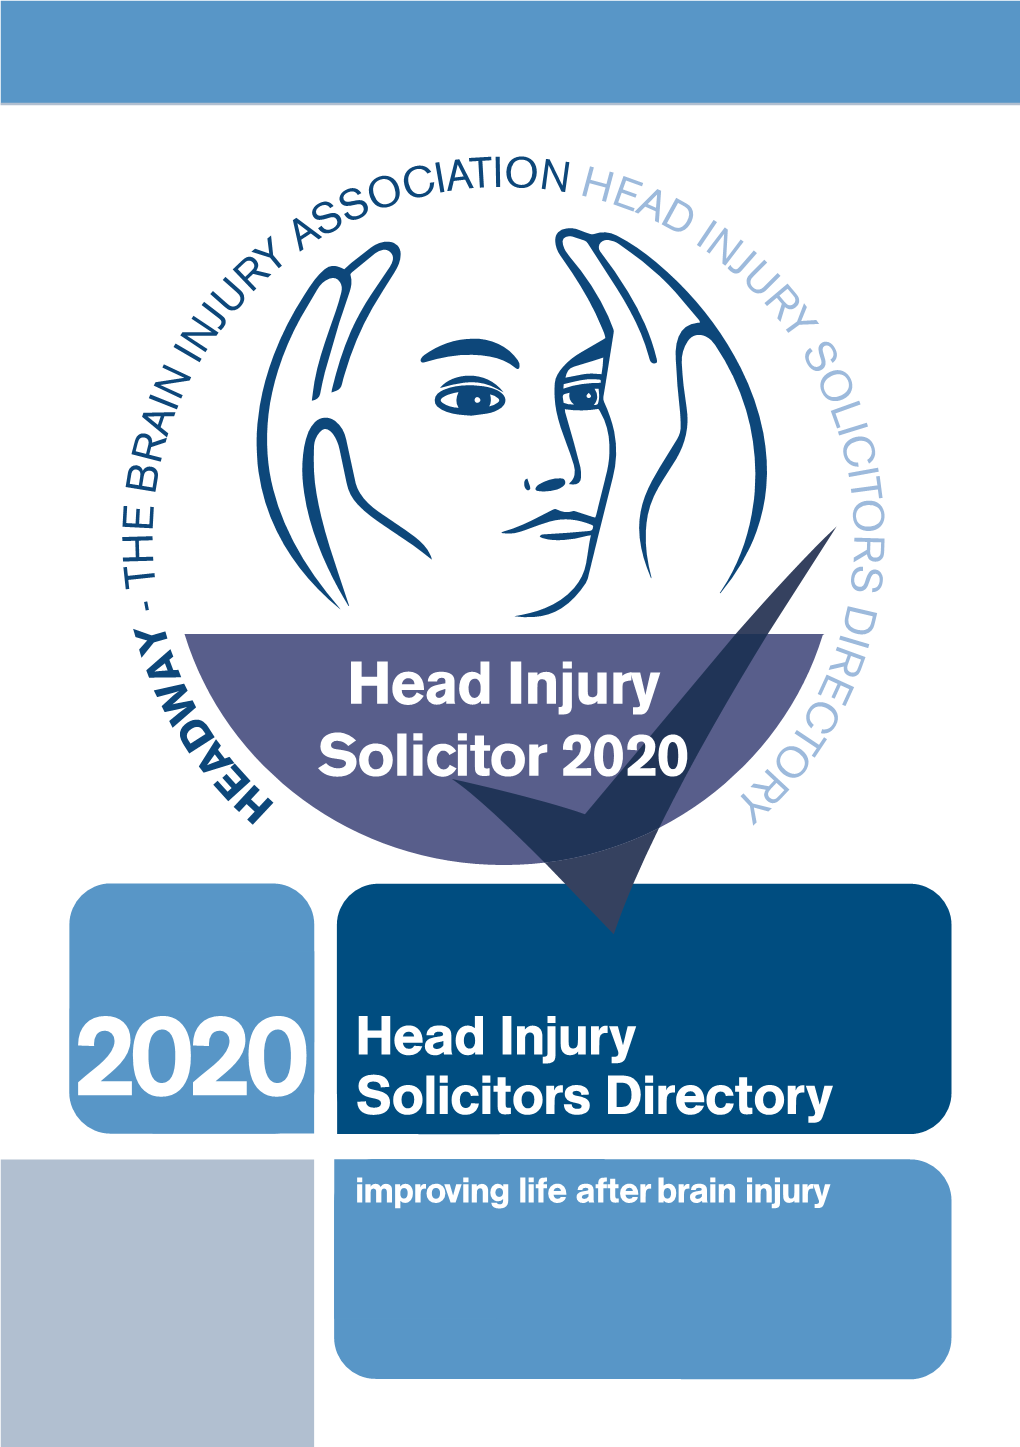 HEAD INJURY SOLICITORS DIRECTORY 2020 Published by Headway – the Brain Injury Association Bradbury House, 190 Bagnall Road, Old Basford, Nottingham NG6 8SF